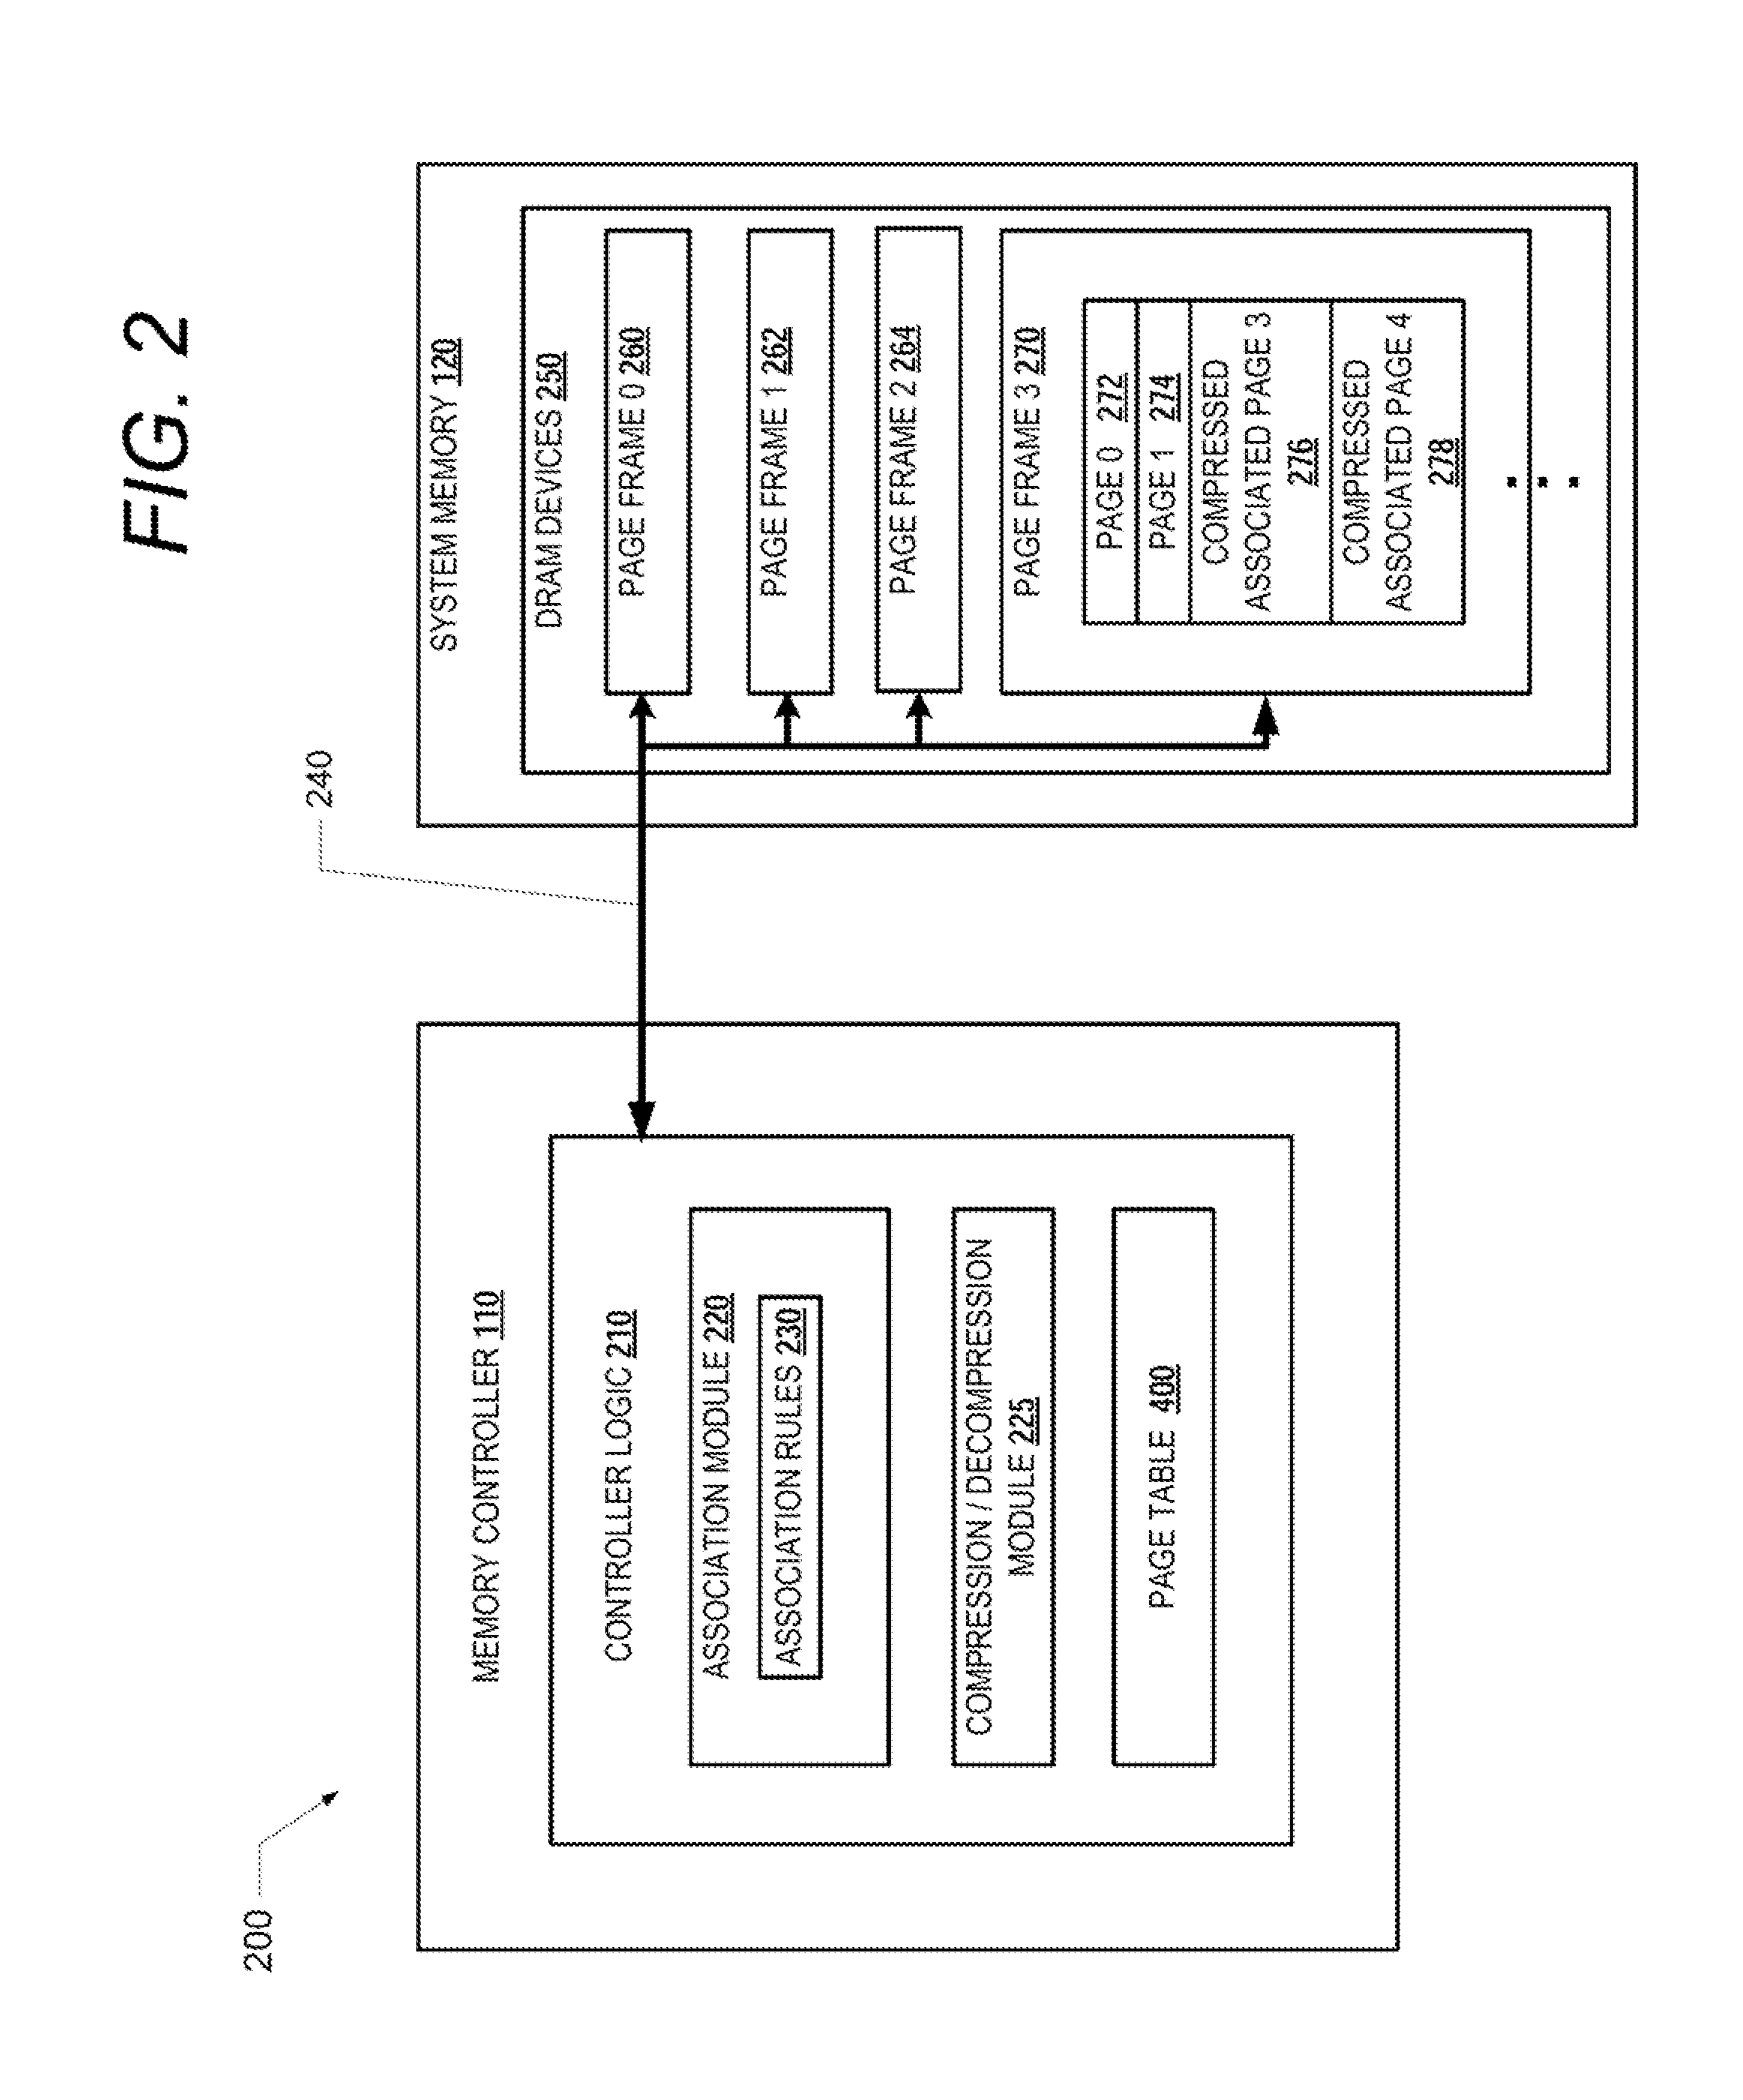 Efficient management of computer memory using memory page associations and memory compression